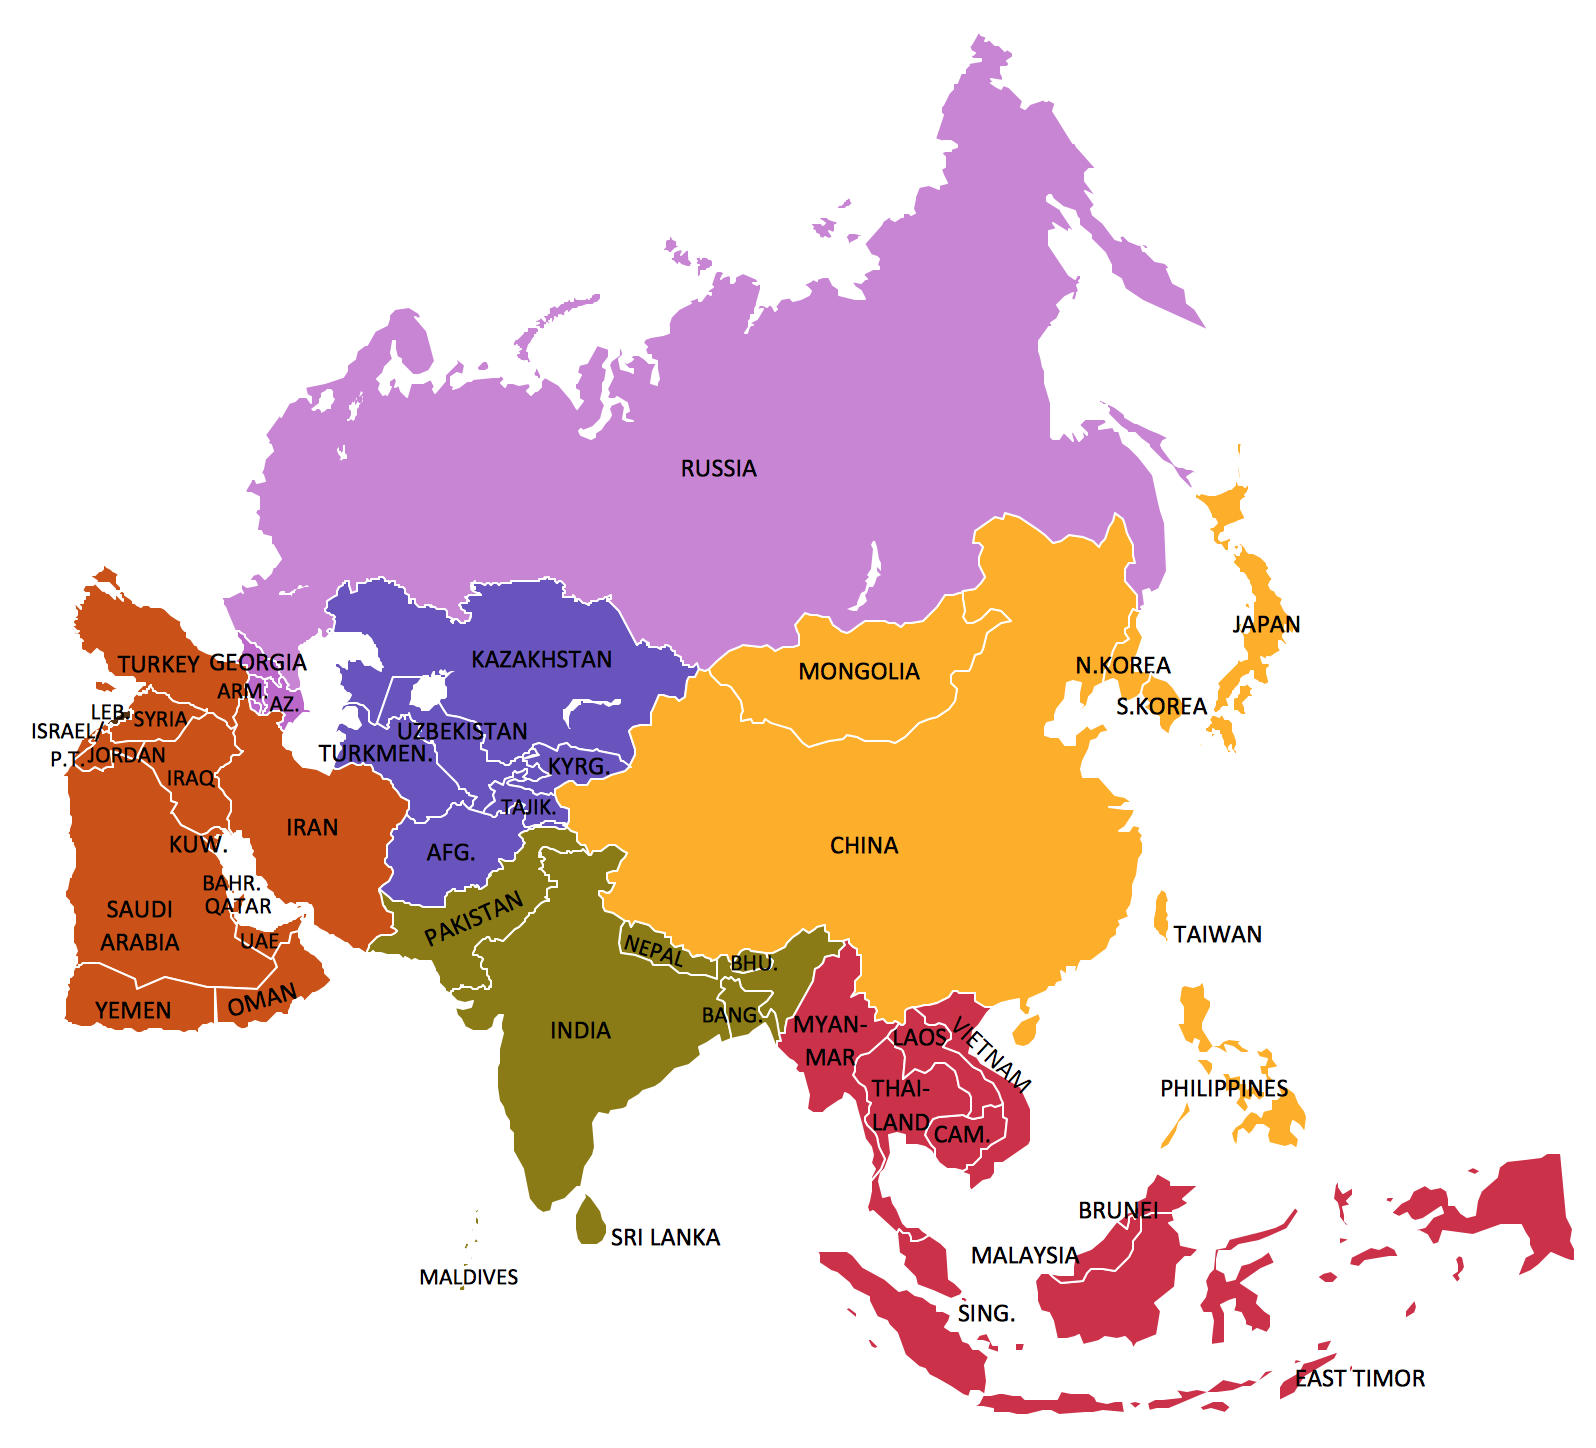 http://www.conceptdraw.com/How-To-Guide/picture/Geo-Map-of-Asia.png